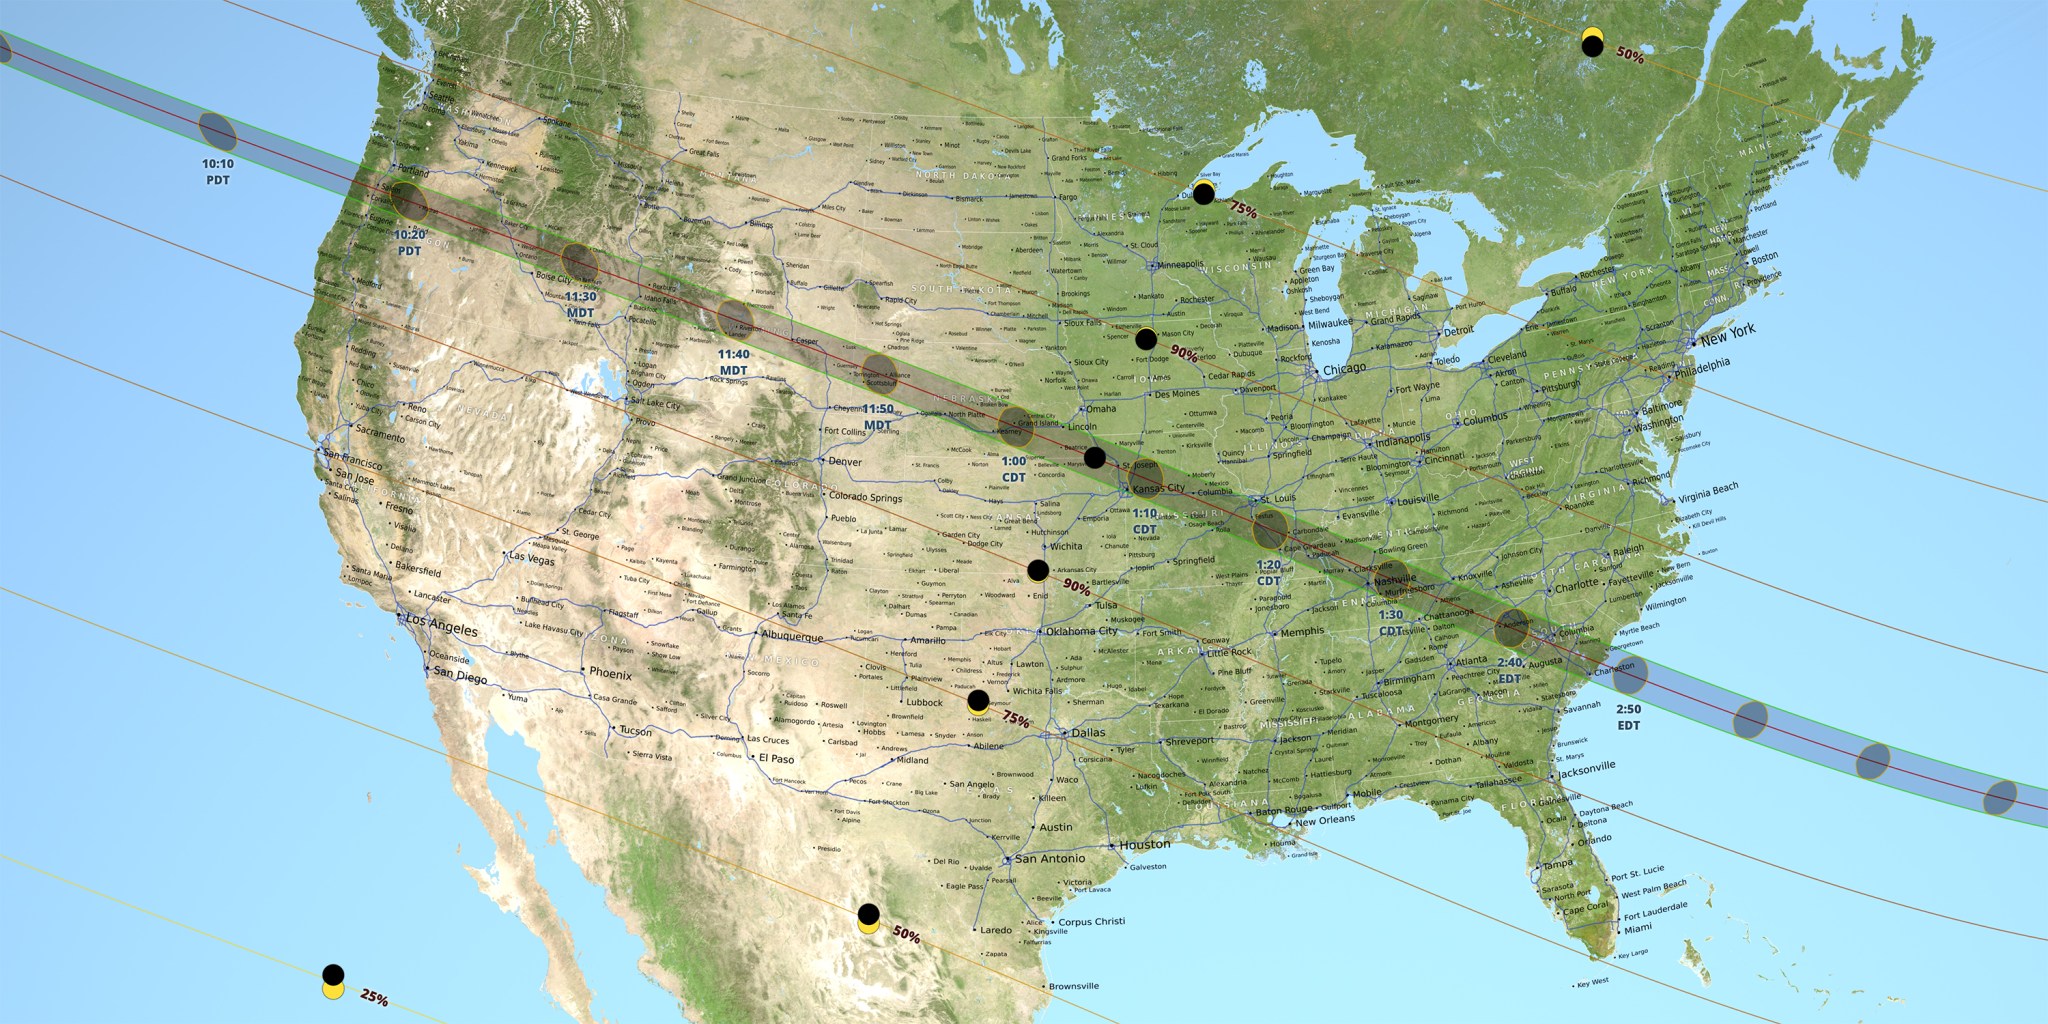 Map of US with shadow line northwest to southeast